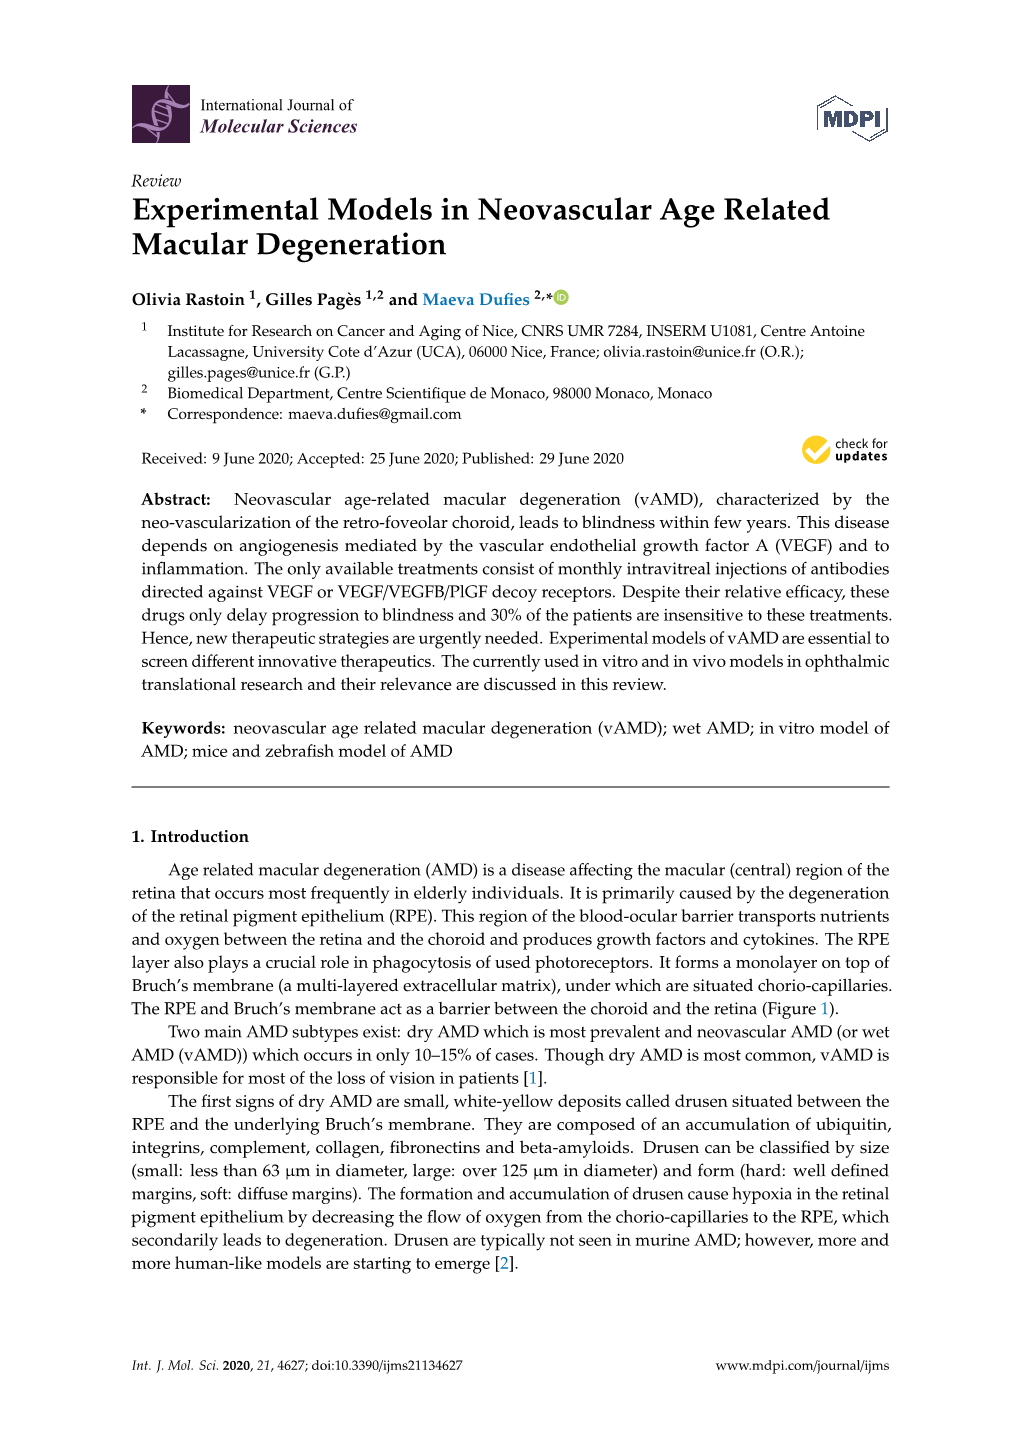 Experimental Models in Neovascular Age Related Macular Degeneration